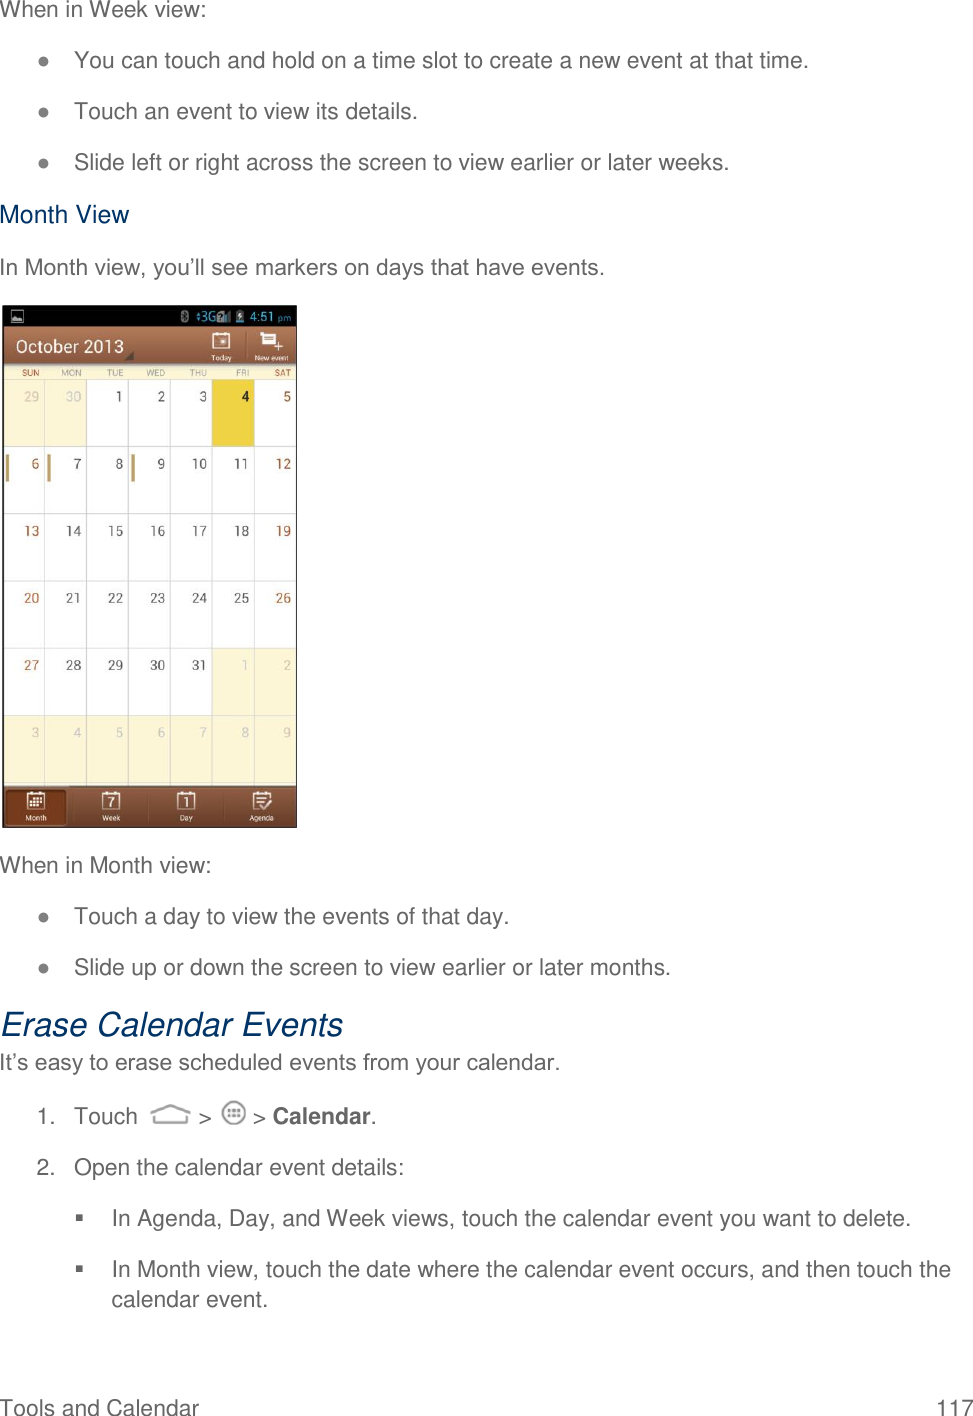 Tools and Calendar  117 When in Week view: ● You can touch and hold on a time slot to create a new event at that time. ● Touch an event to view its details. ● Slide left or right across the screen to view earlier or later weeks. Month View In Month view, you’ll see markers on days that have events.  When in Month view: ● Touch a day to view the events of that day. ● Slide up or down the screen to view earlier or later months. Erase Calendar Events It’s easy to erase scheduled events from your calendar. 1.  Touch   &gt;   &gt; Calendar. 2.  Open the calendar event details:   In Agenda, Day, and Week views, touch the calendar event you want to delete.   In Month view, touch the date where the calendar event occurs, and then touch the calendar event. 